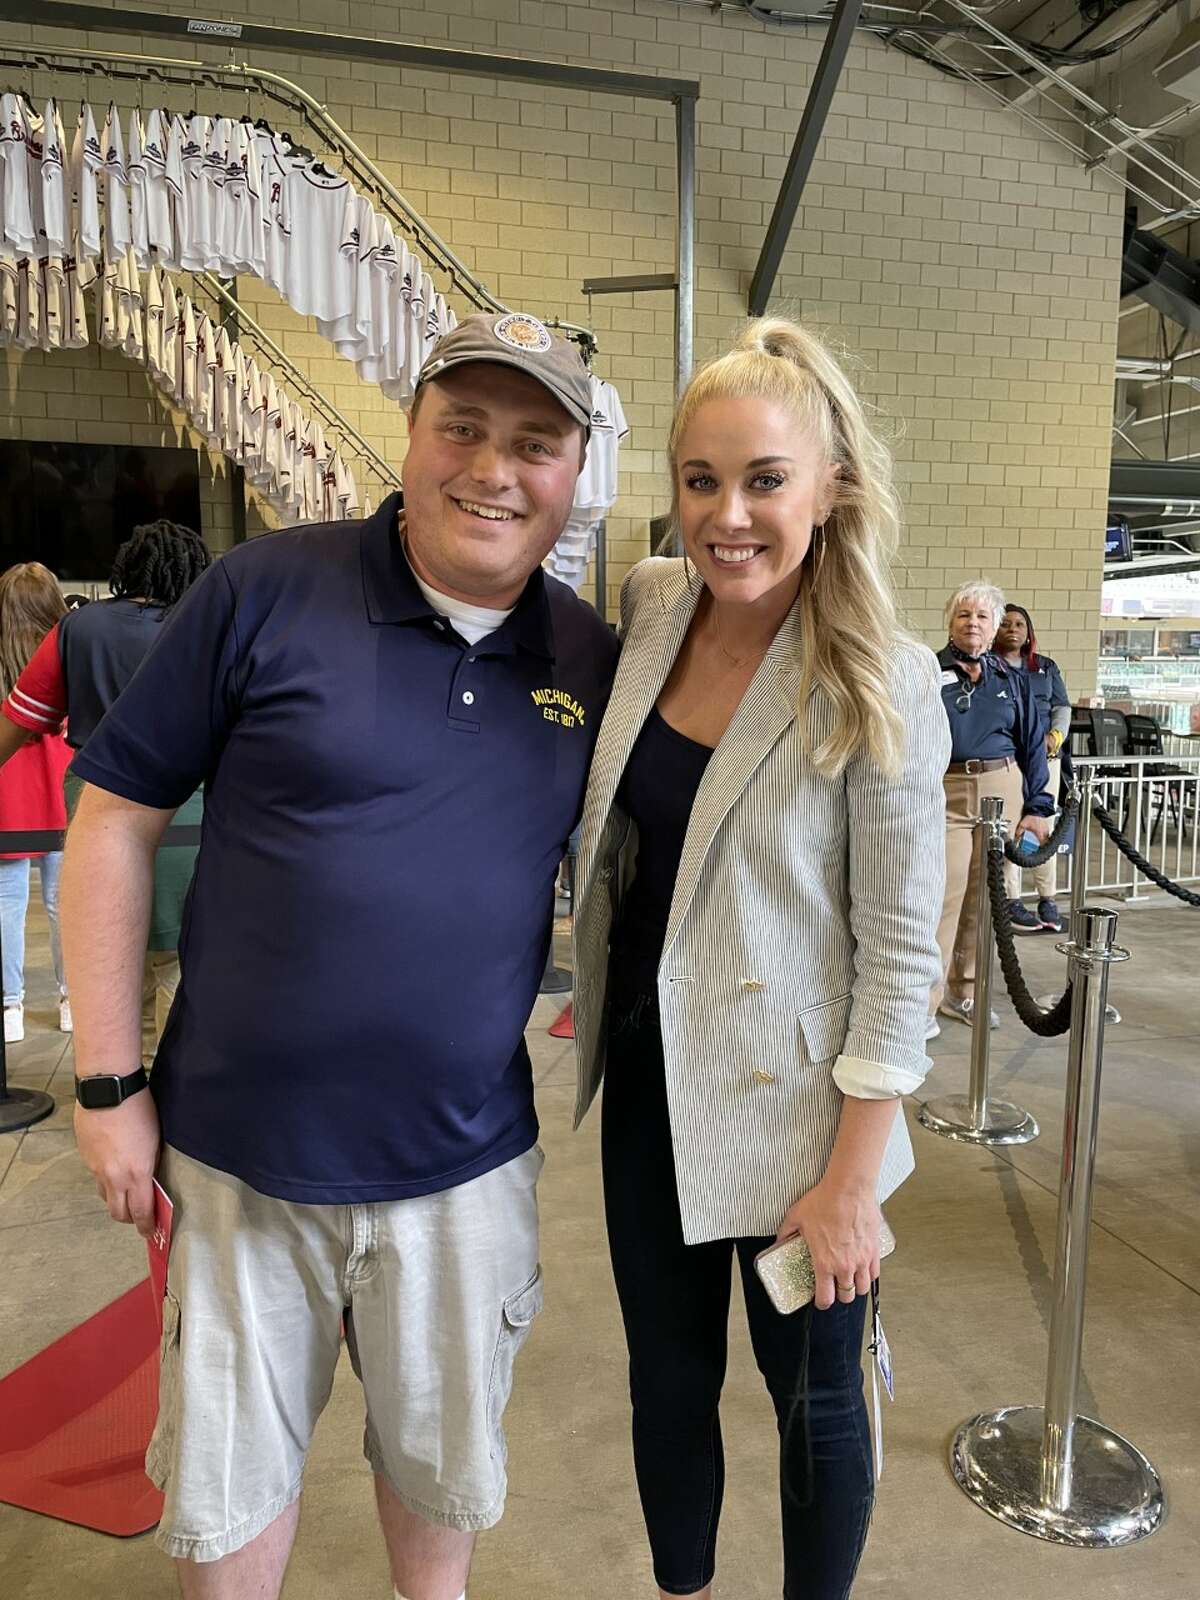 Sportswriter Tom Greene talked with Bally Sports Braves reporter Kelly Crull, the first time Greene and Crull have met since August 2019.